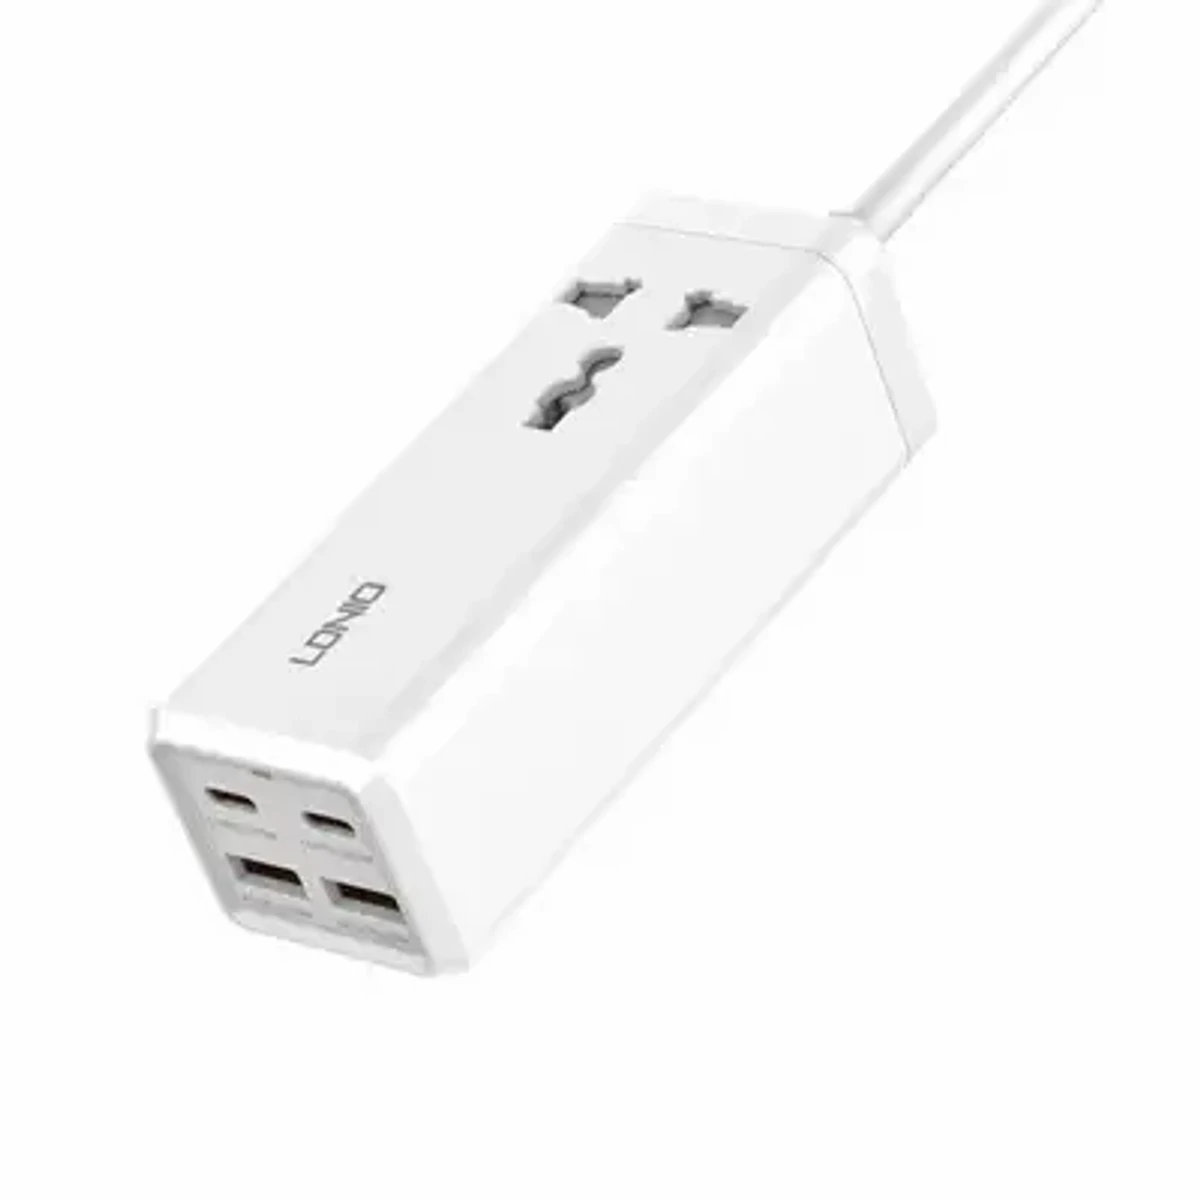 LDNIO 65W USB C Charger 4 Ports USB Outlet Desktop Power Strip For Laptop/Macbook/Ipad/Camera/Cell Phone Fast Charge Charger